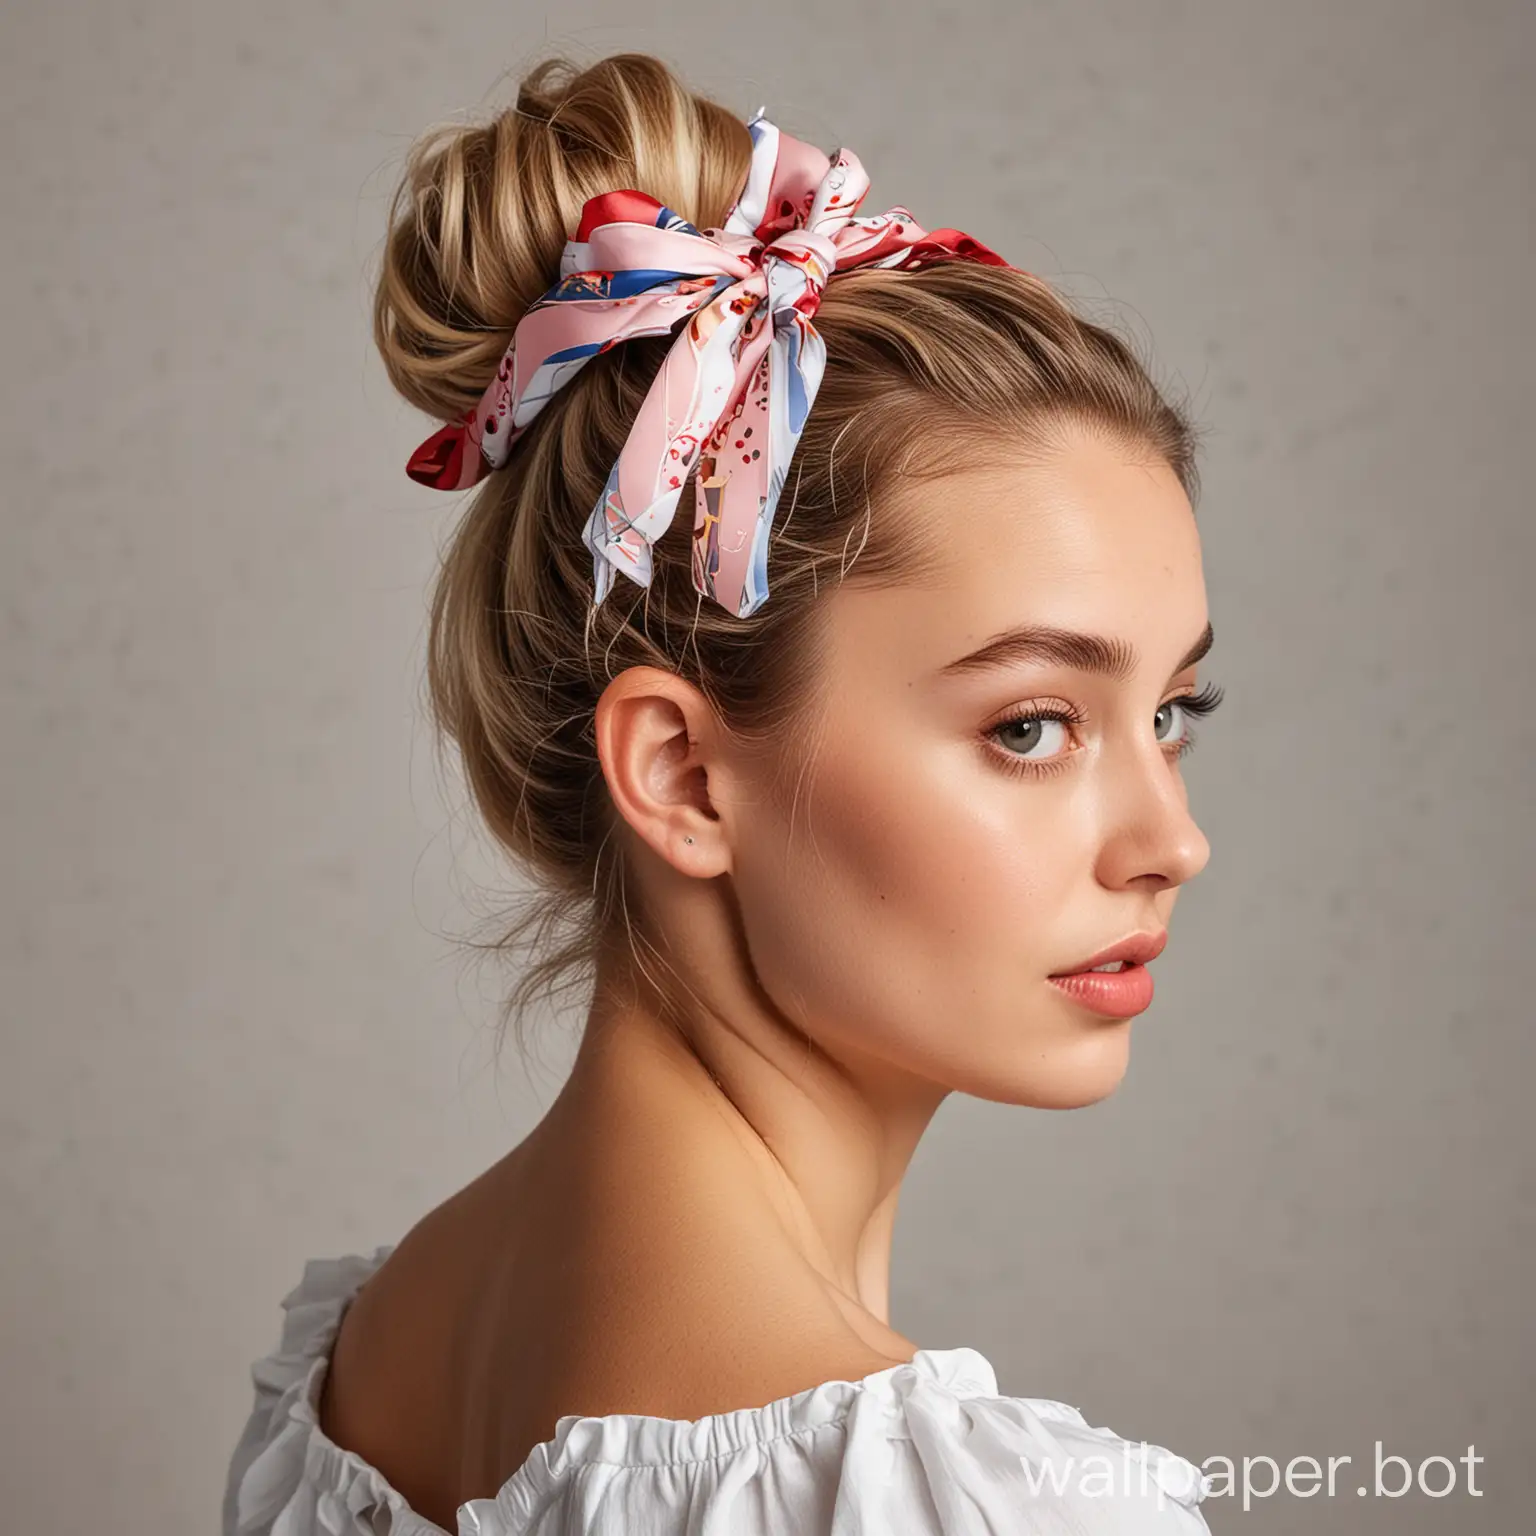 Fashionable-Woman-with-RibbonAdorned-Scrunchie